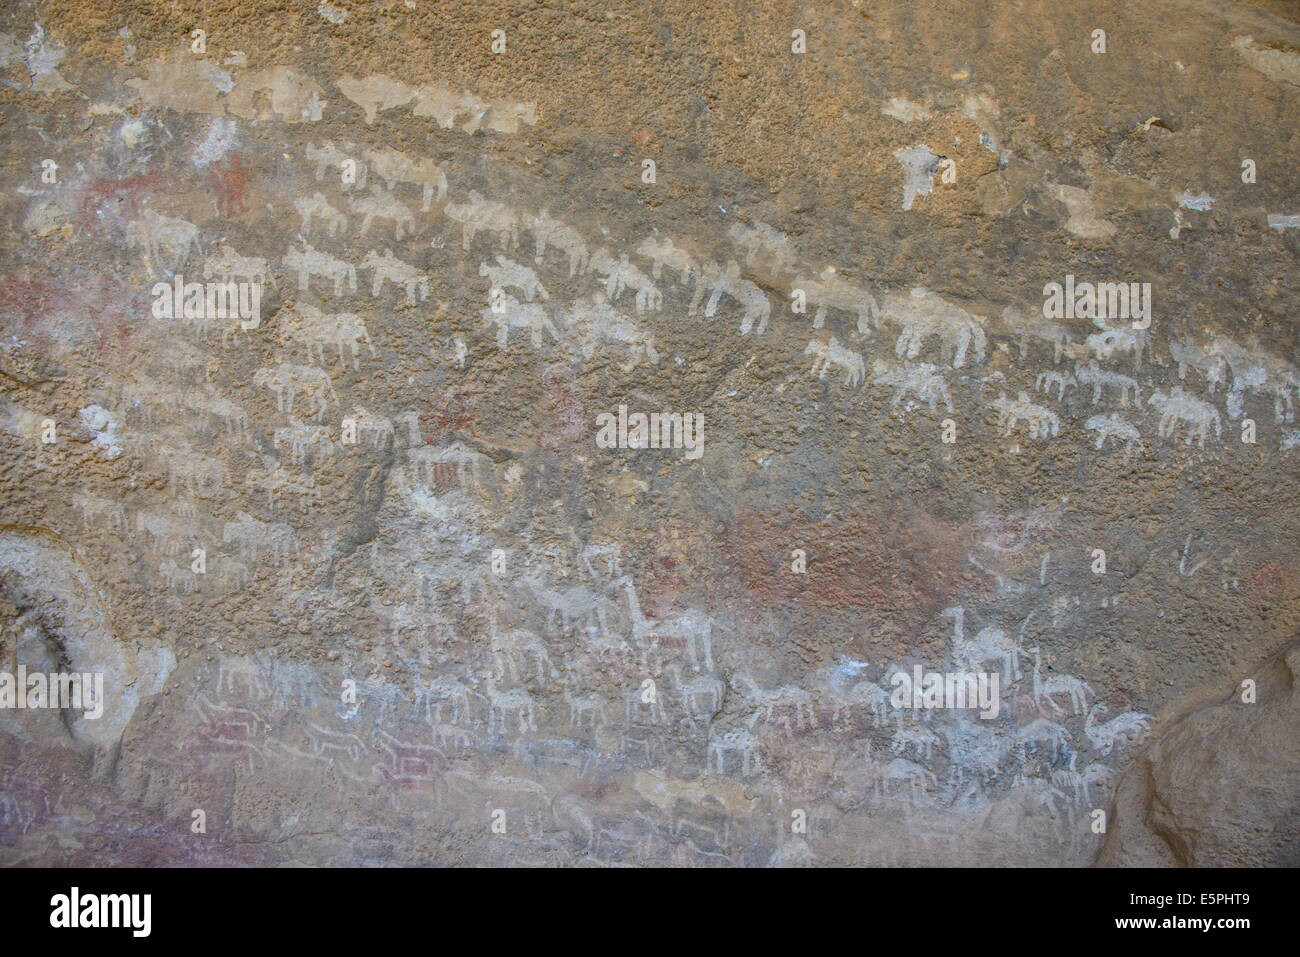 Ancient rock paintings at the Pre-Aksumite settlement of Qohaito, Eritrea, Africa Stock Photo